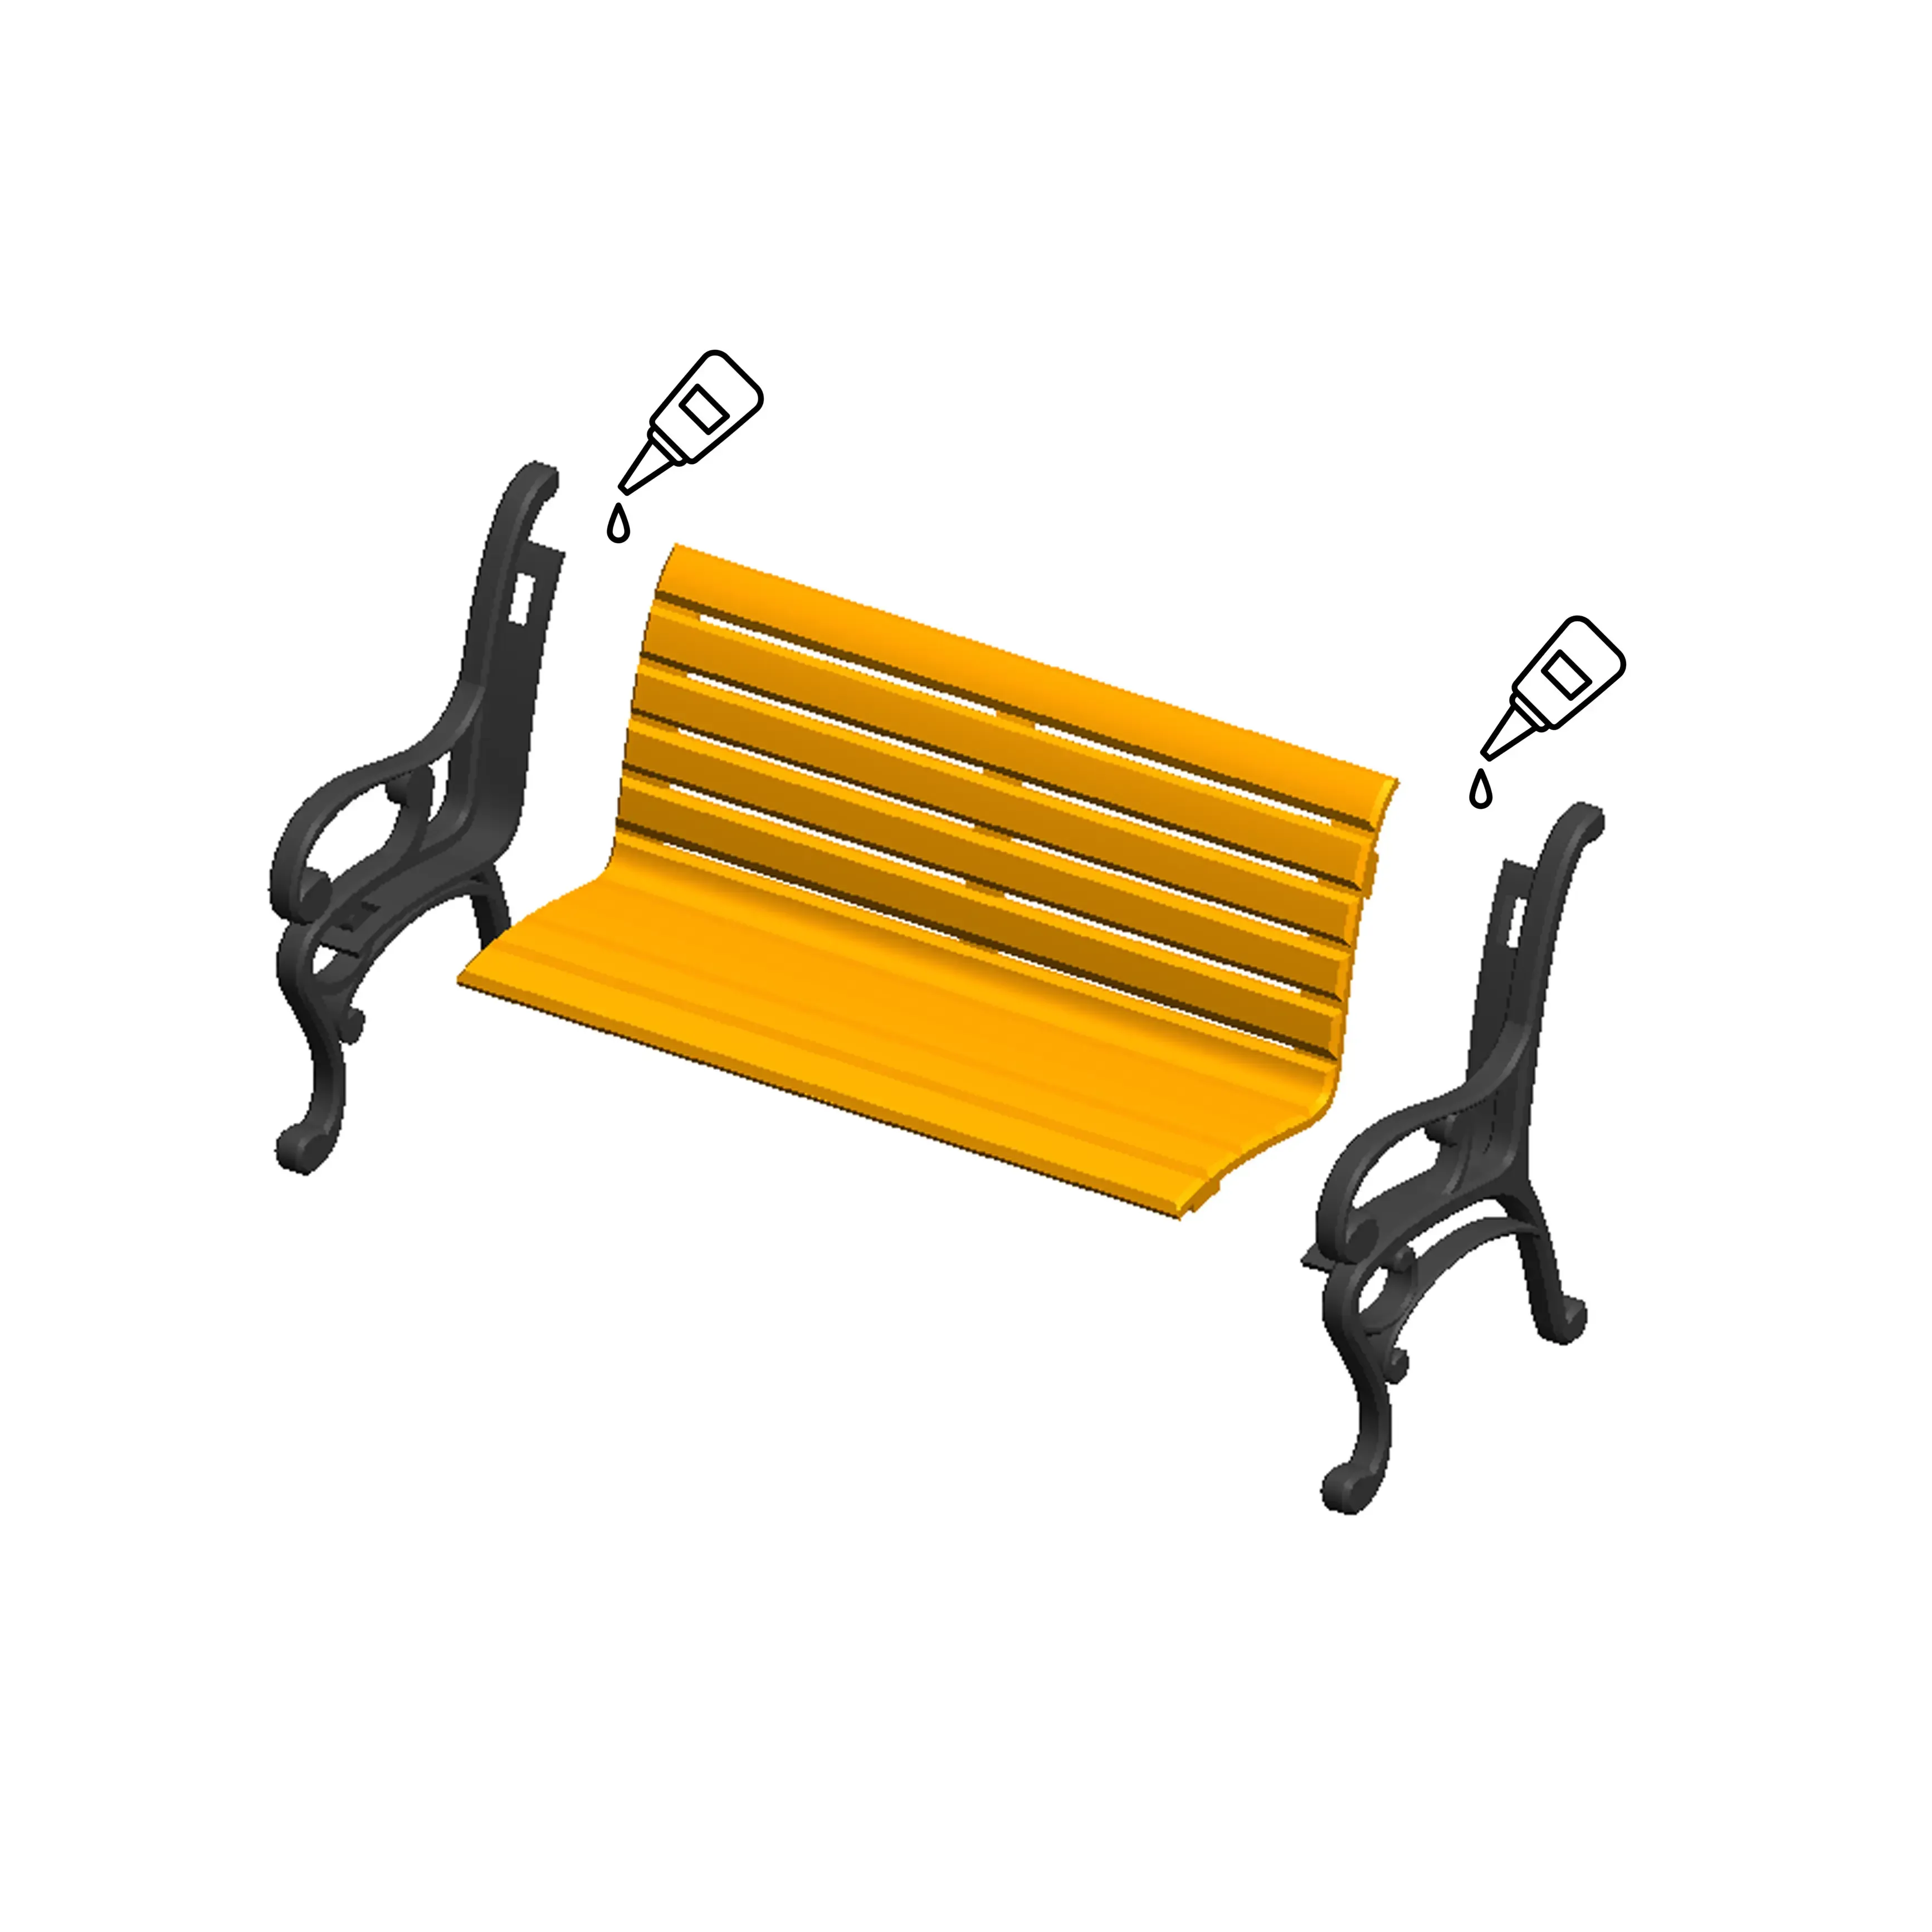 Classic Park Bench Card Holder